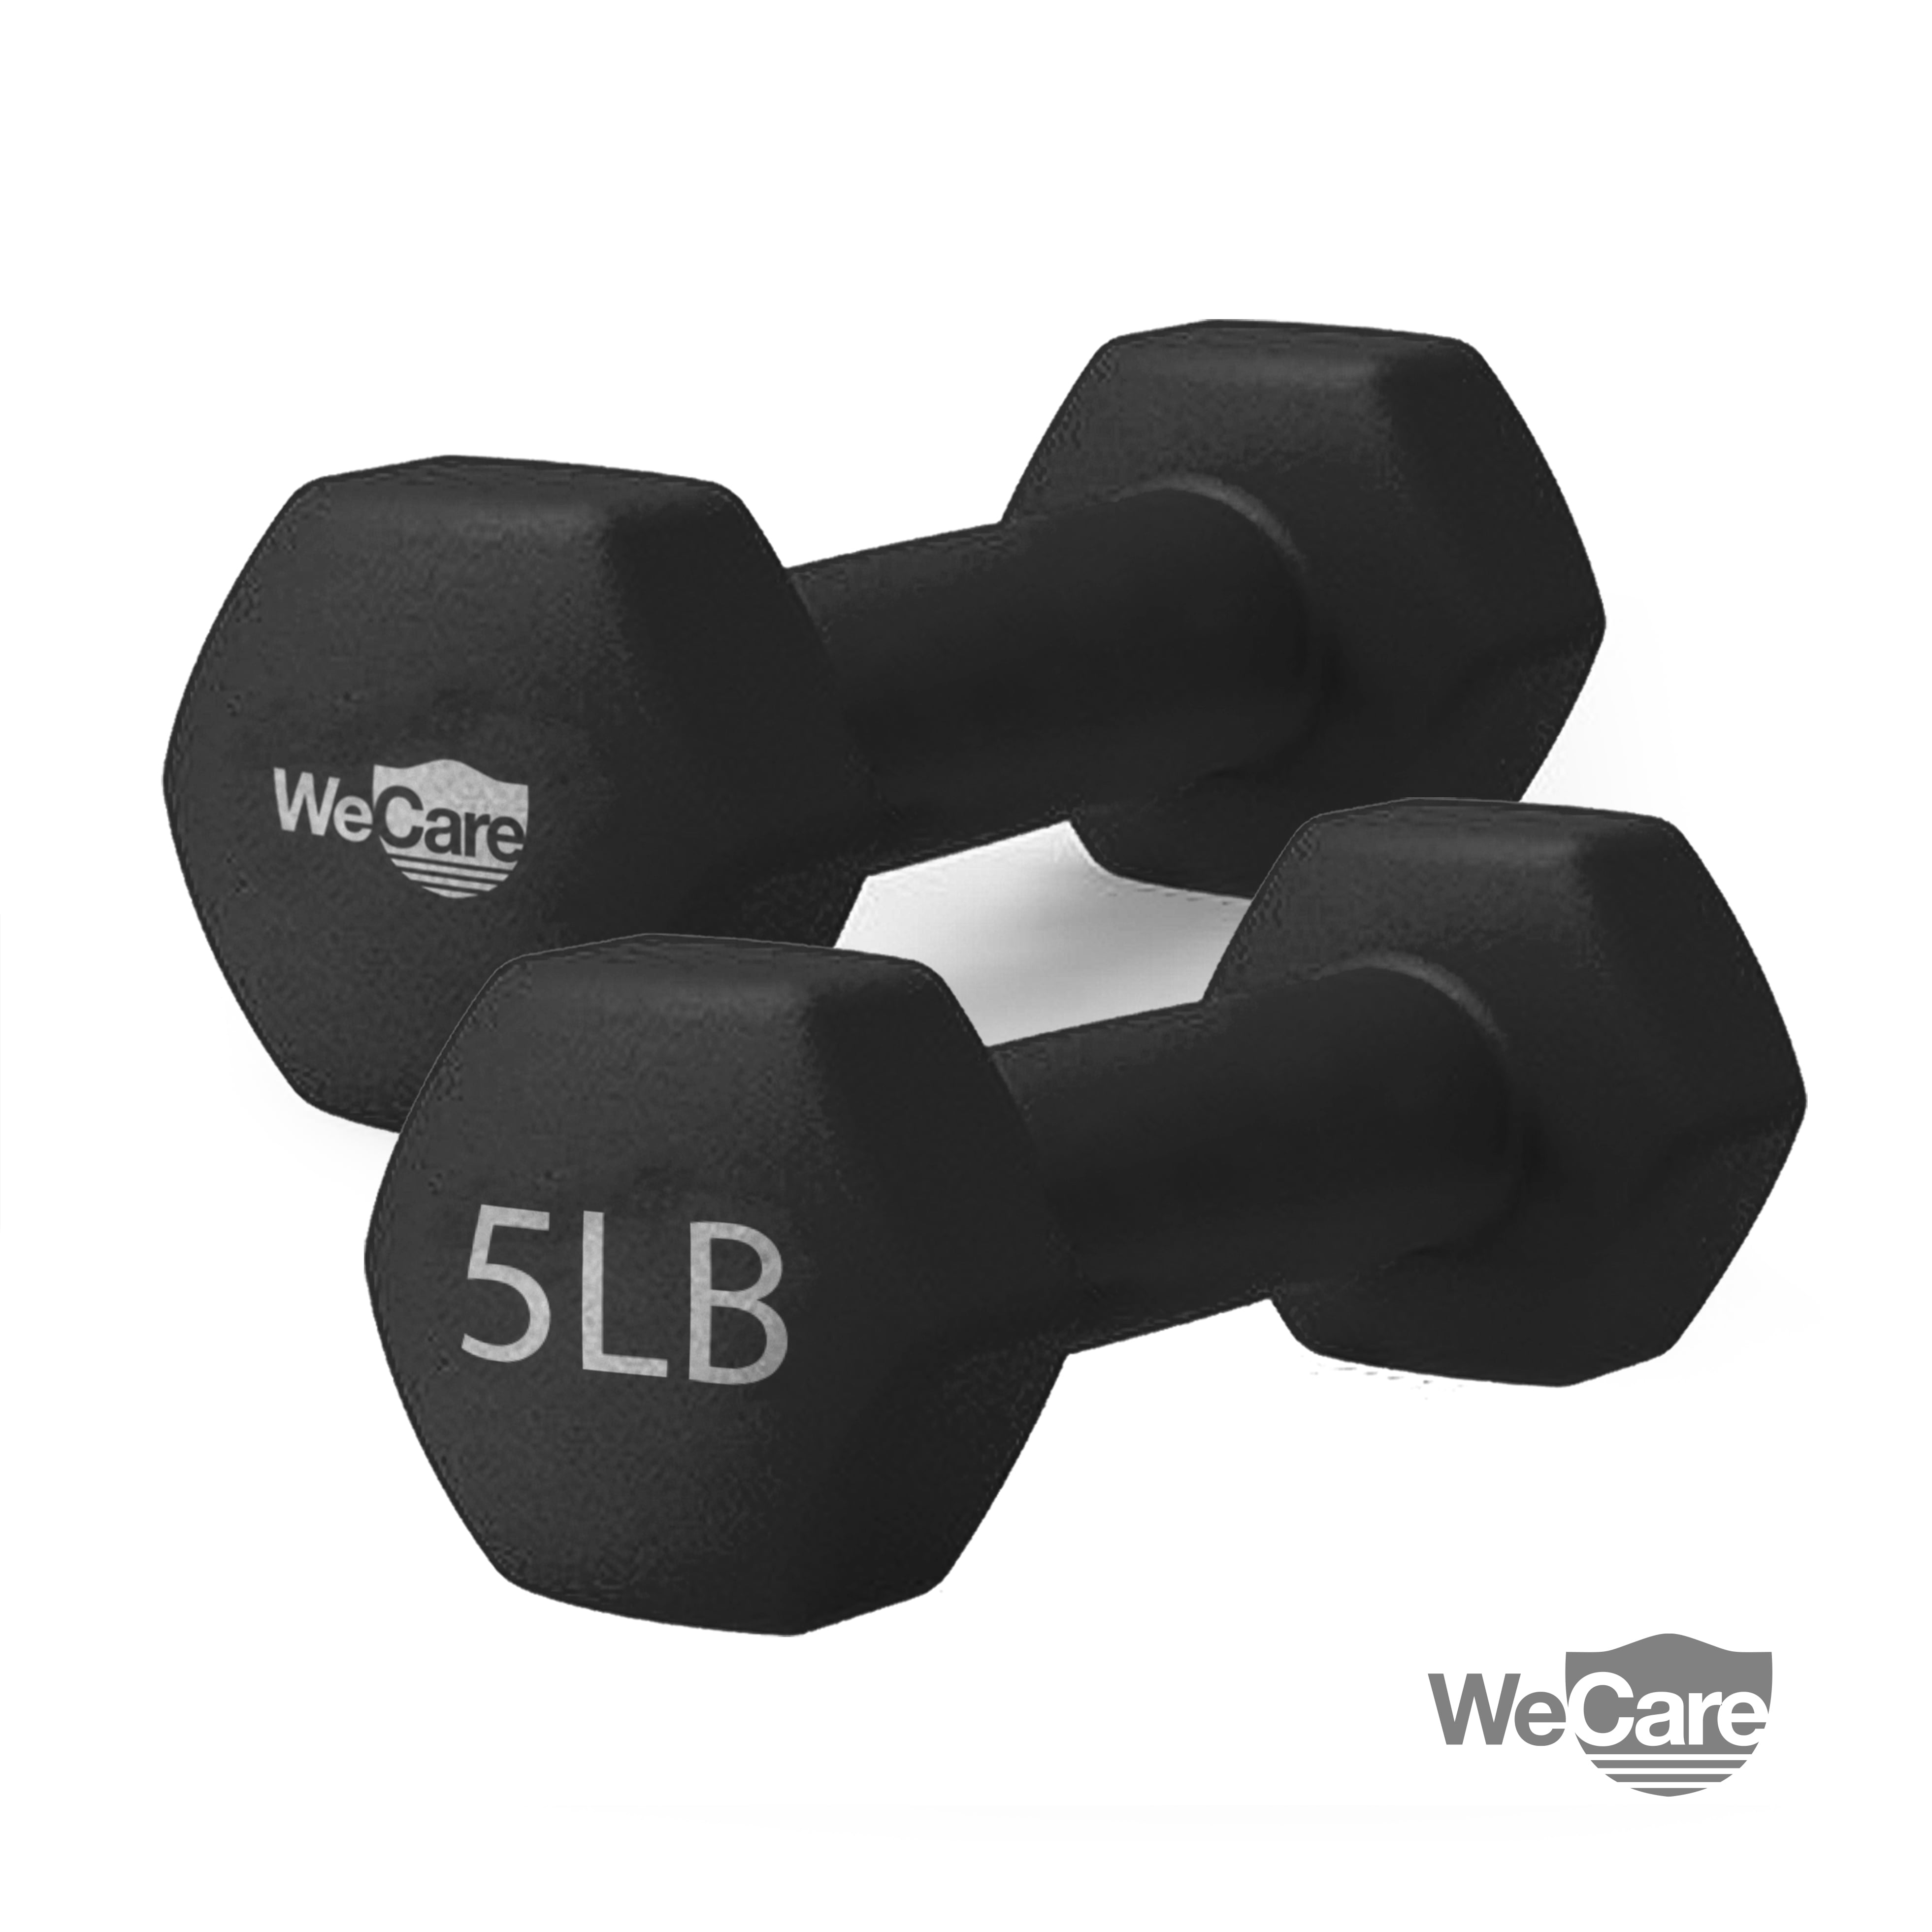 BRAND NEW CAP Hex Neoprene 5 lb Pound Two Dumbbell Weights BUY IT NOW! 